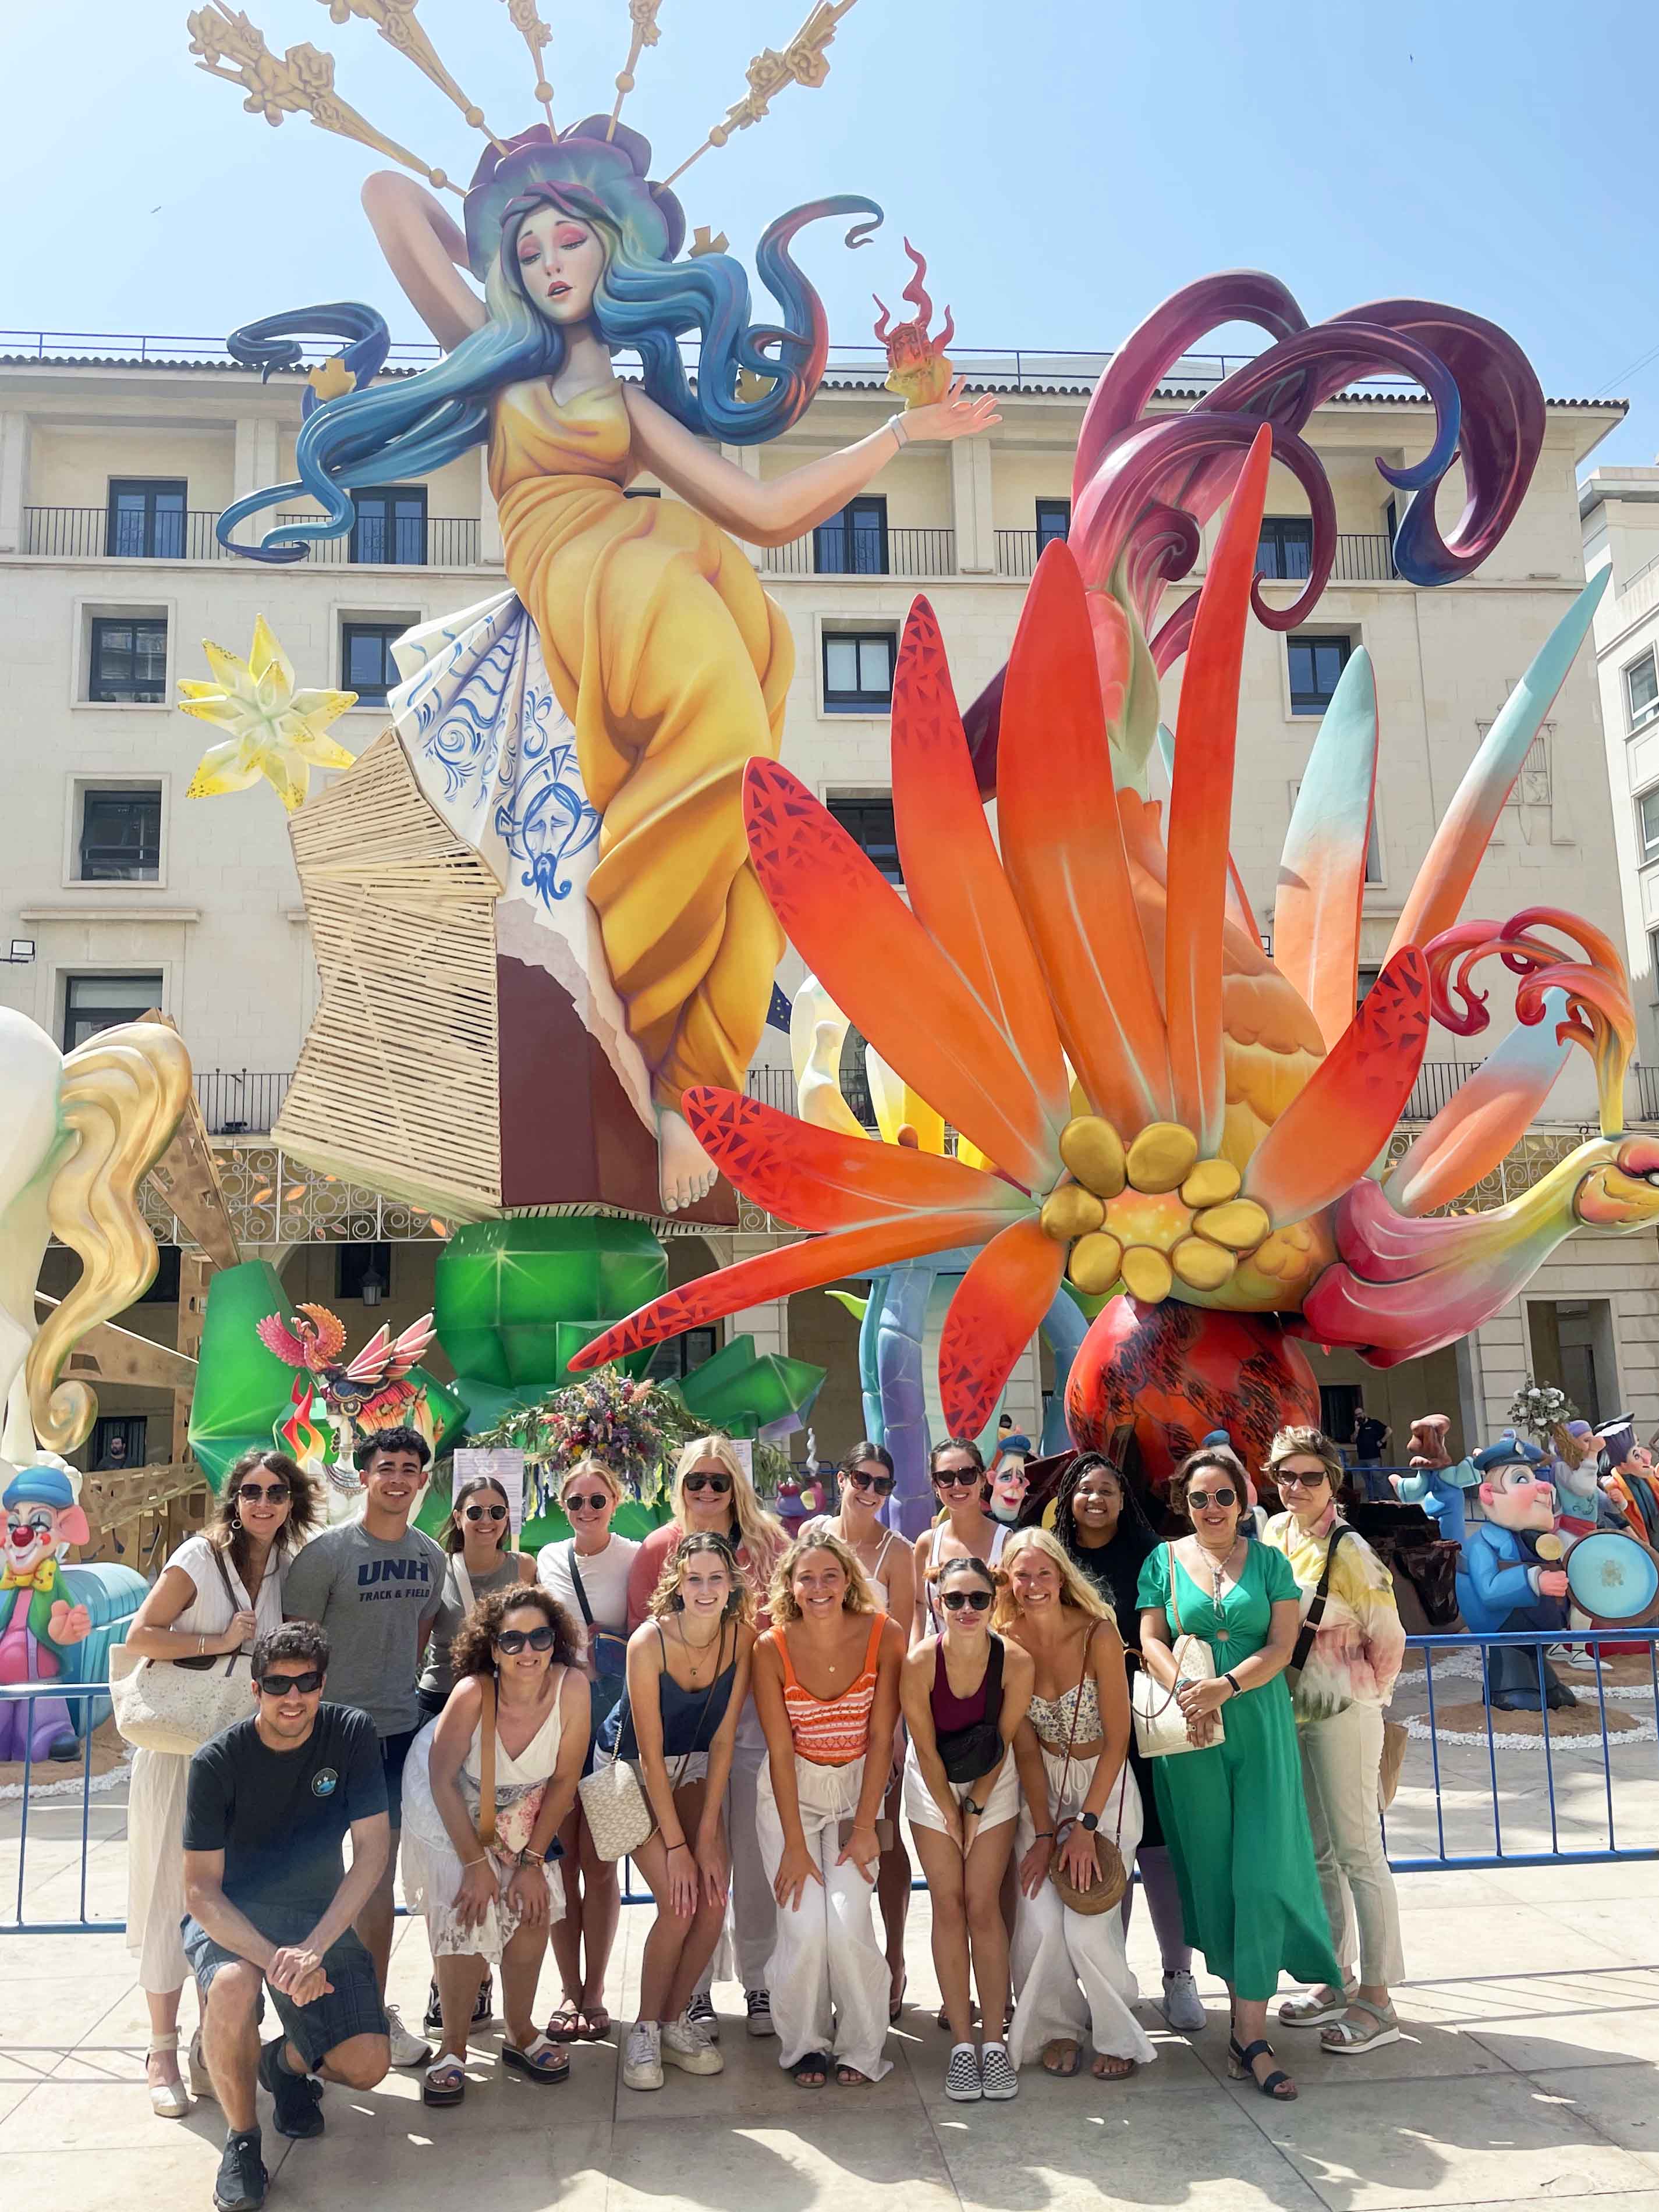 Students at a festival posing in front of a colorful sculpture in Alicante, Spain.